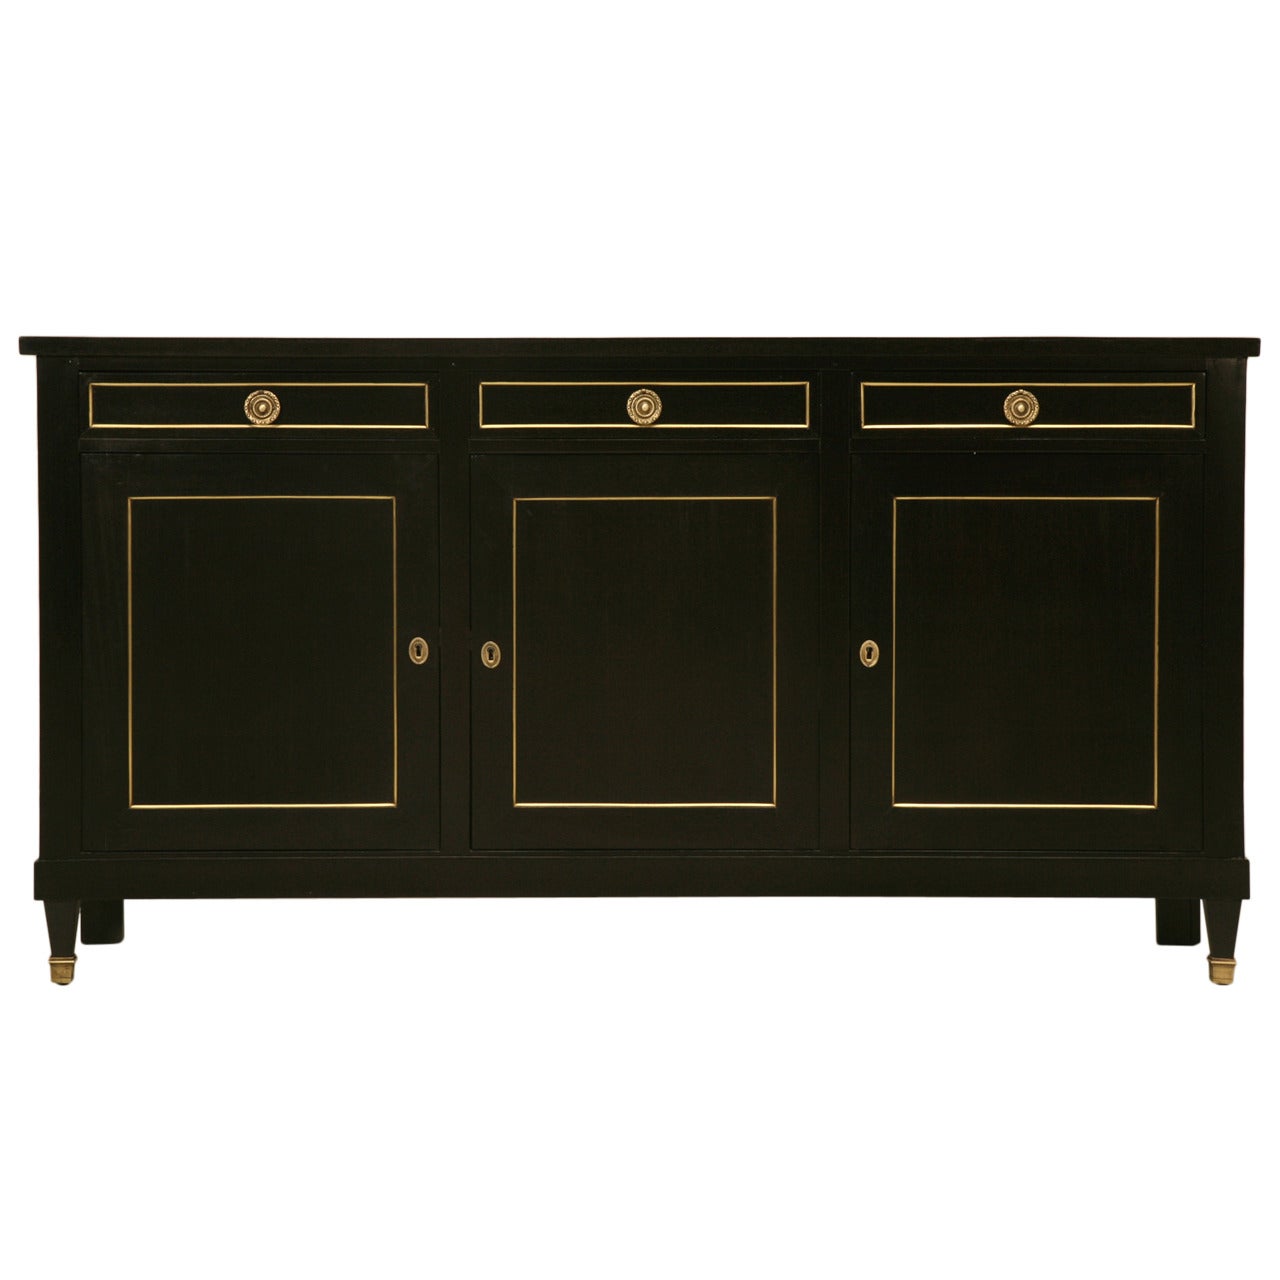 French Louis XVI Style Buffet Done in a Traditional Ebonized Finish